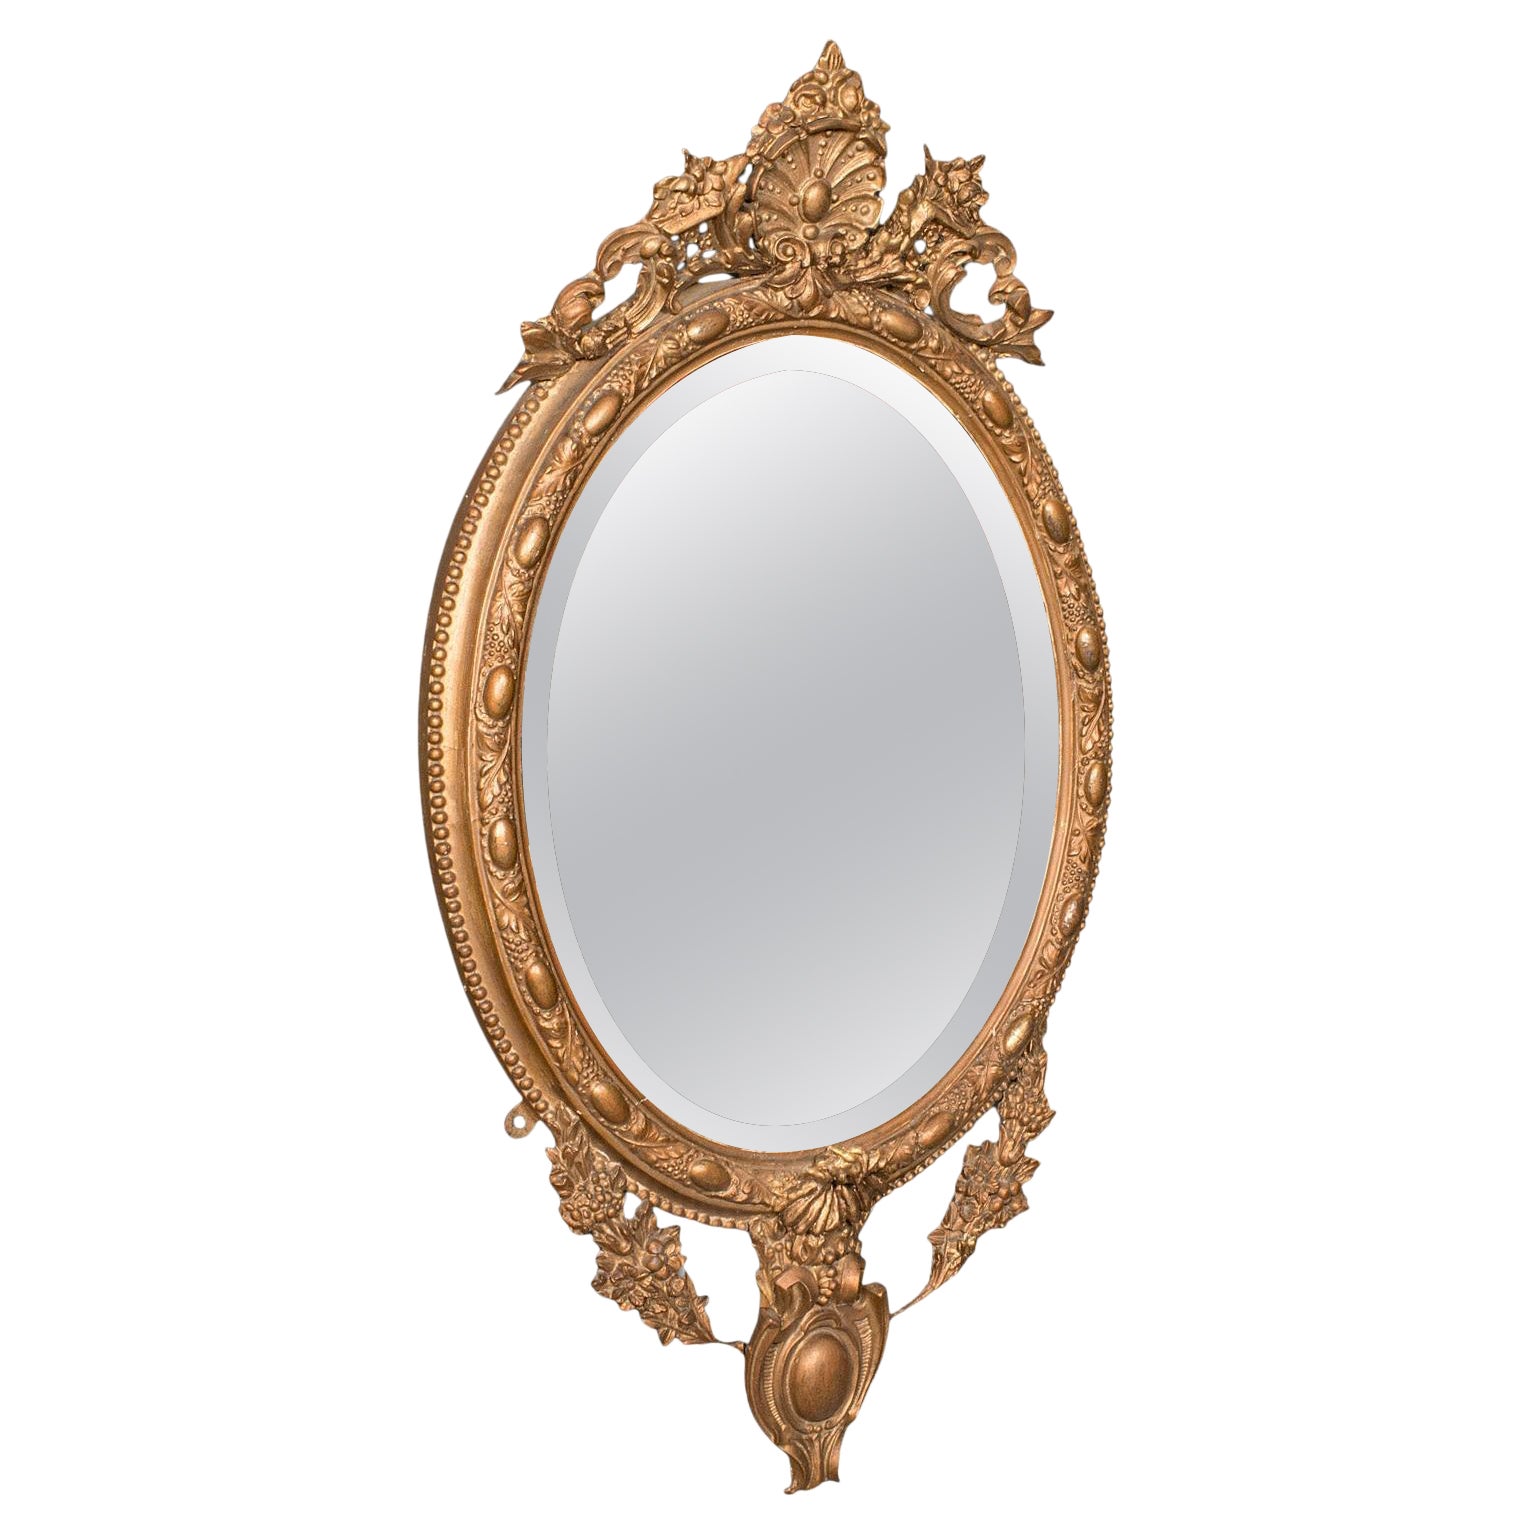 Antique Ornate Wall Mirror, French, Gilt Gesso, Bevelled Glass, Victorian, 1900 For Sale